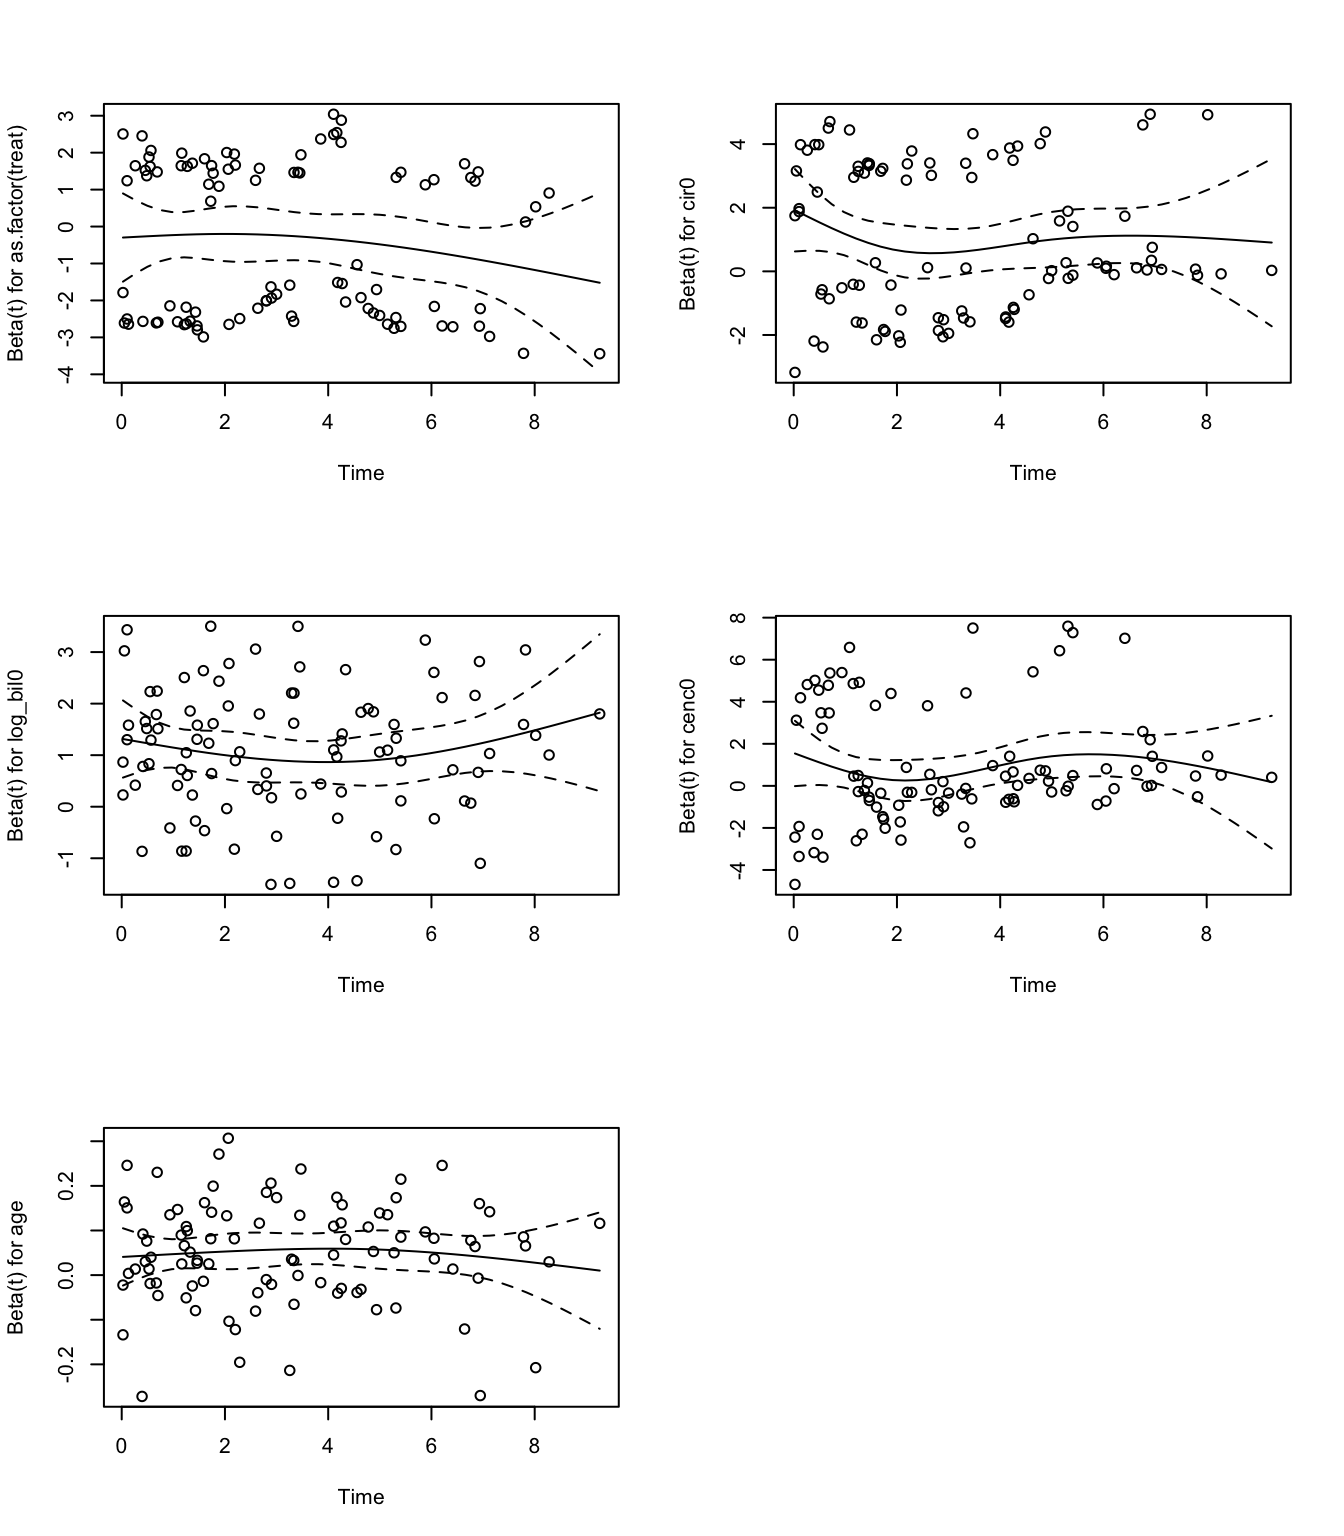 Scaled Schoenfeld residuals plot from Cox model for each covariate.